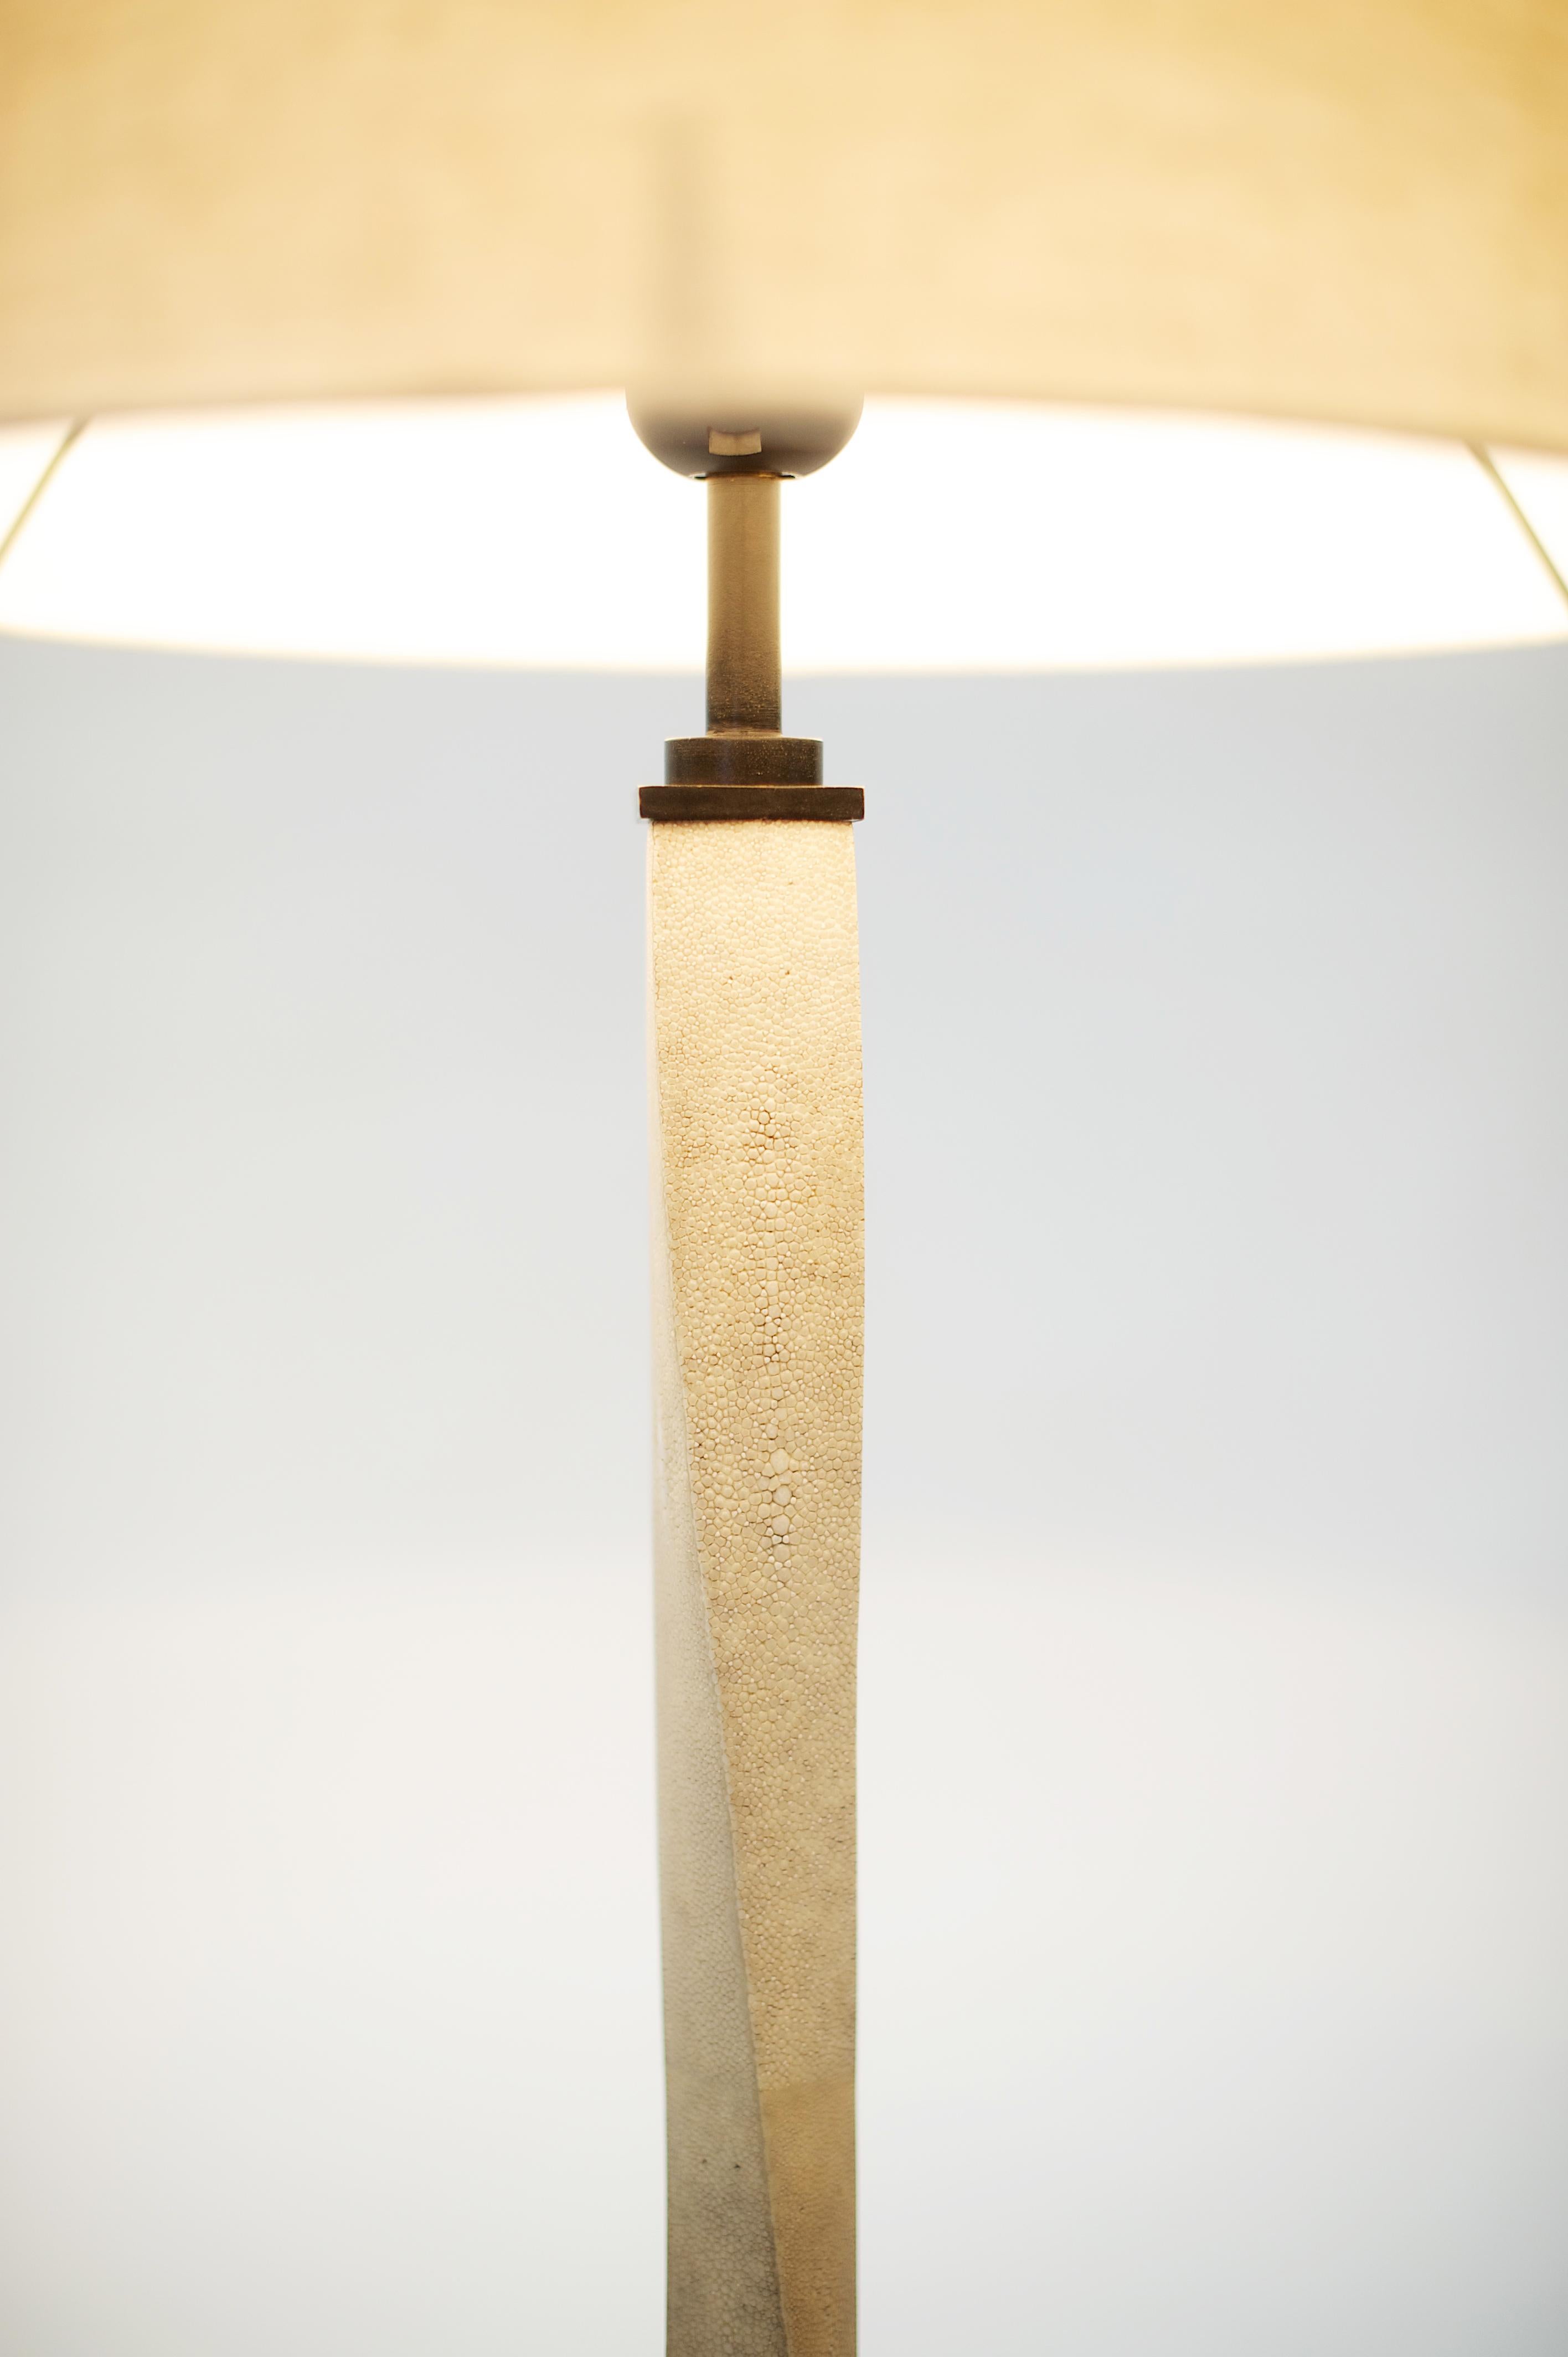 Available now and ready to ship! 

Description/
Shagreen and bronze floor lamp produced using the superior lost wax bronze casting process, hand-rubbed and finished in selected patina. 

Dimensions/
Small/
dia 15.7 x h 59.8 in
dia 40 x h